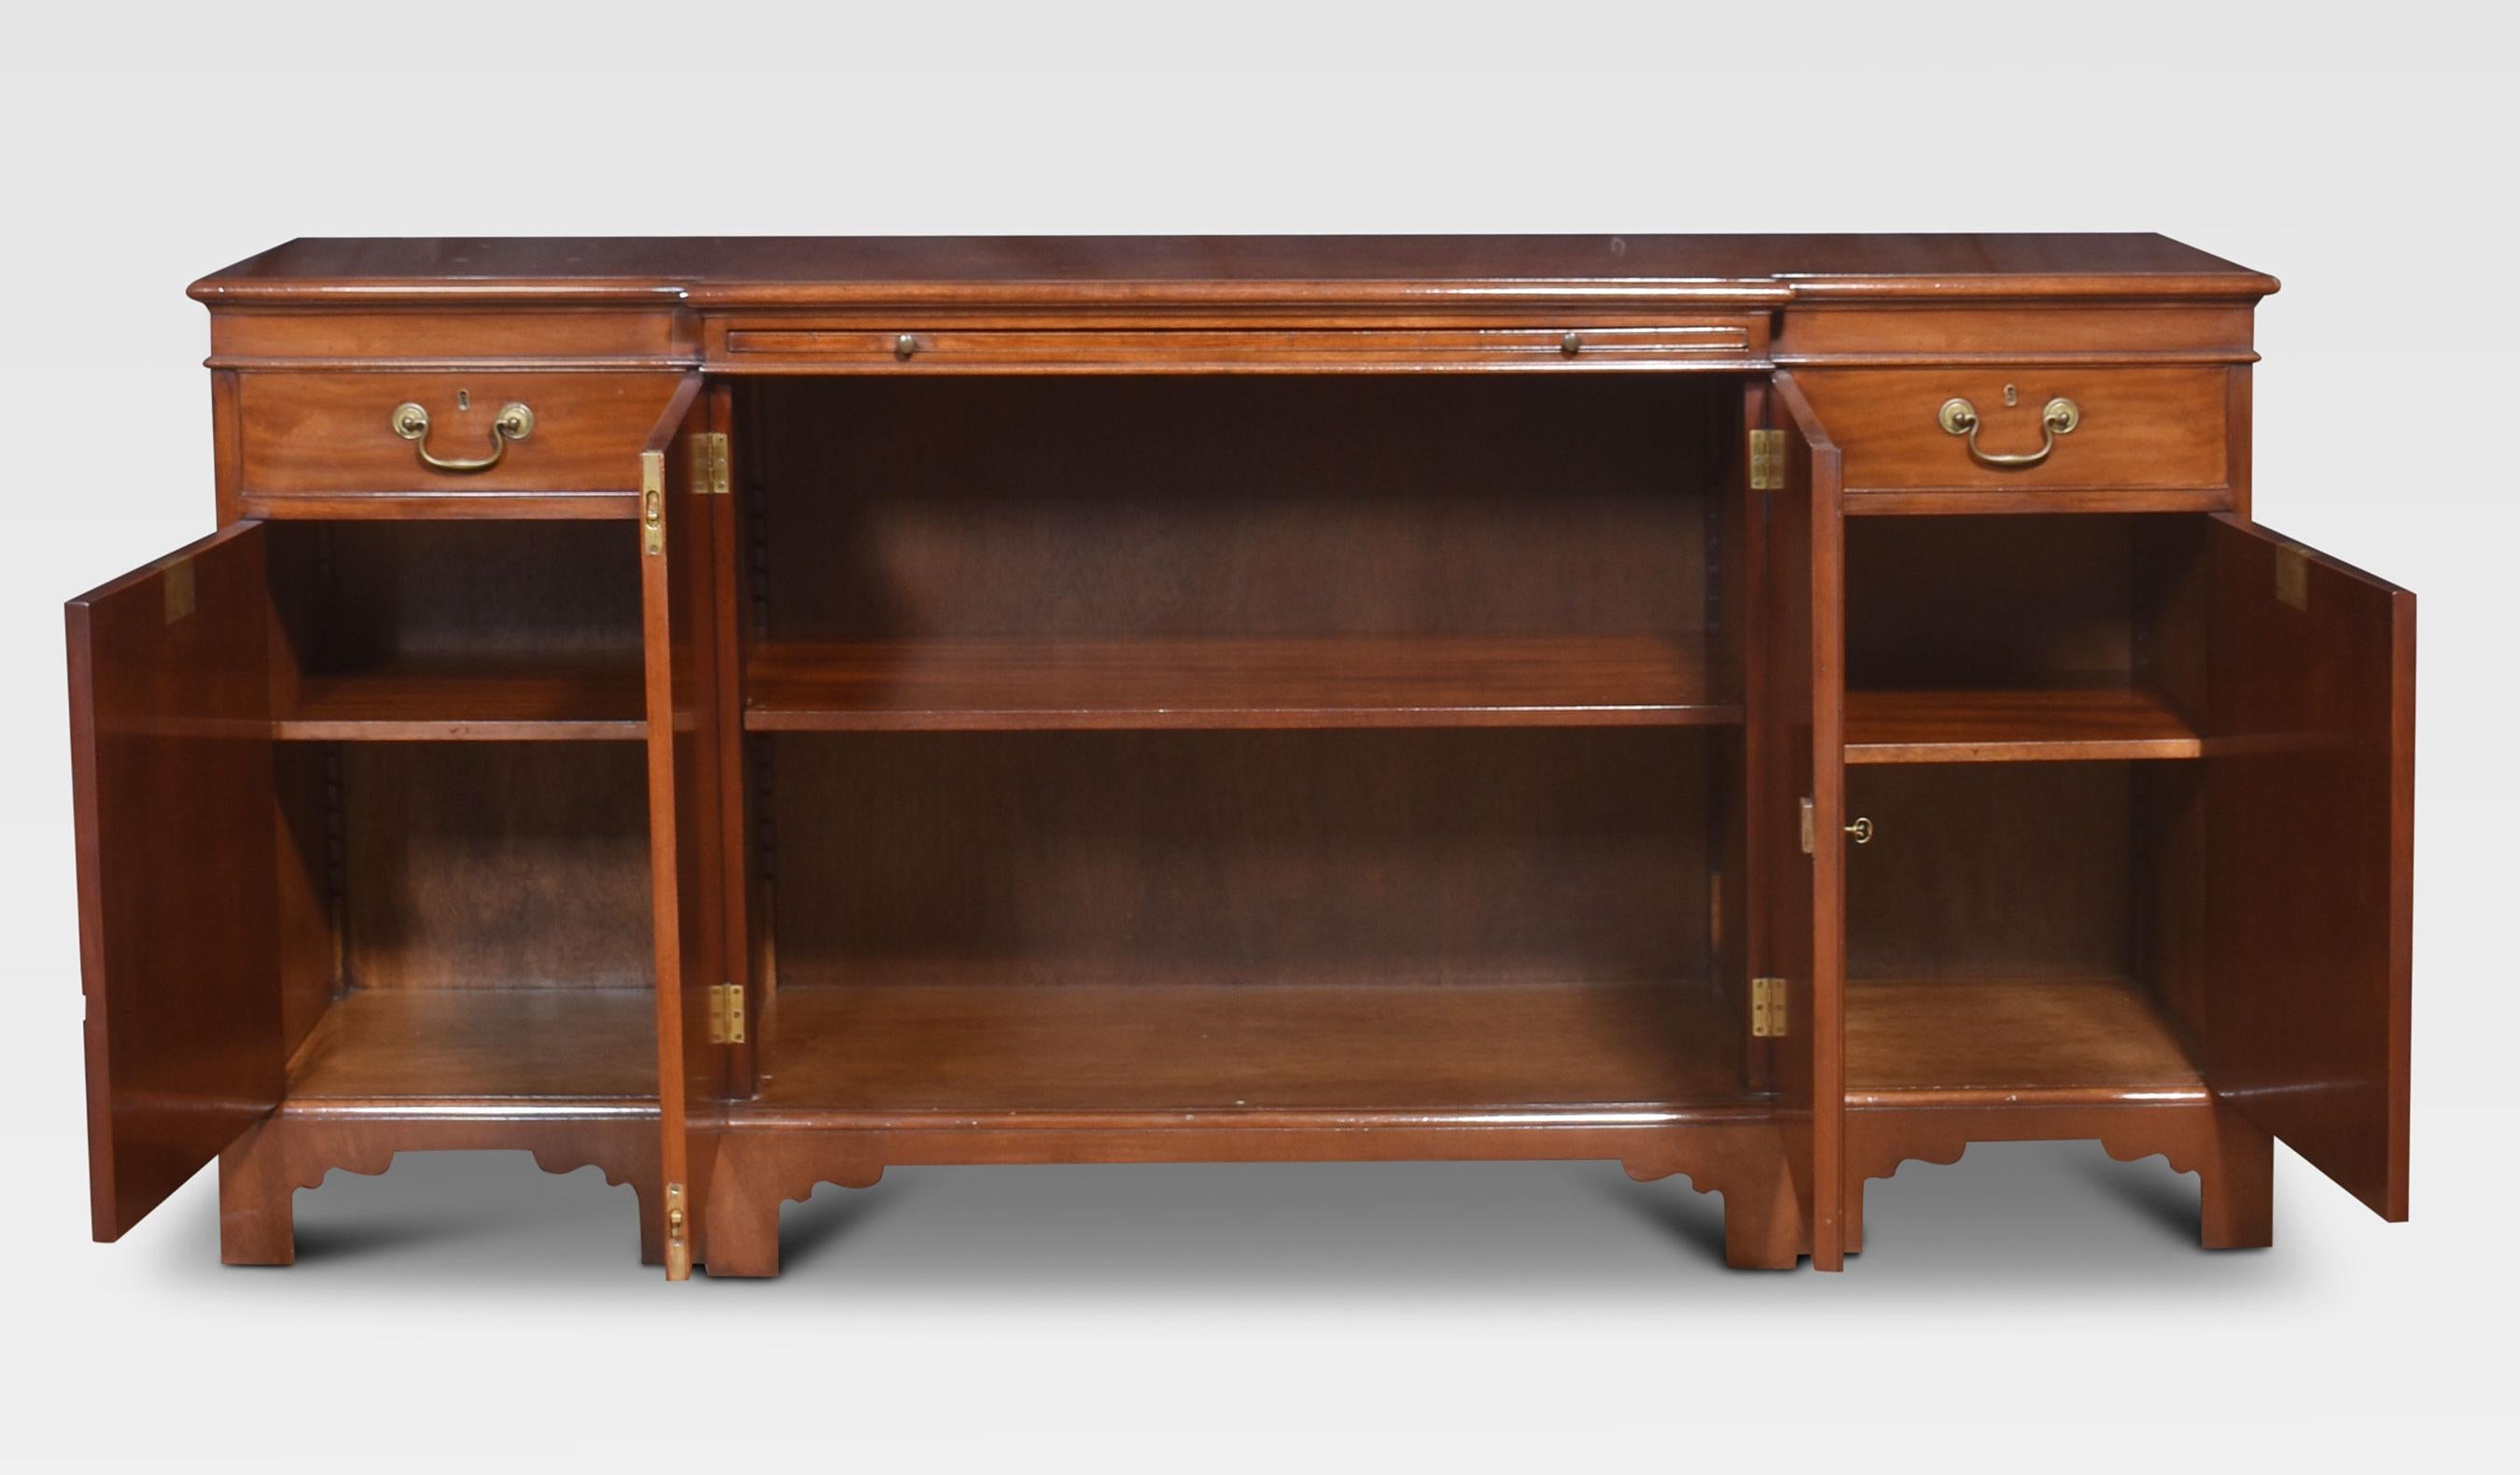 Mahogany Sideboard the long rectangular breakfront top above a central brush-in slide having two panelled doors below opening to reveal an adjustable shelf. Flanked by two banks of faux drawers, opening to reveal further shelving. All raised on